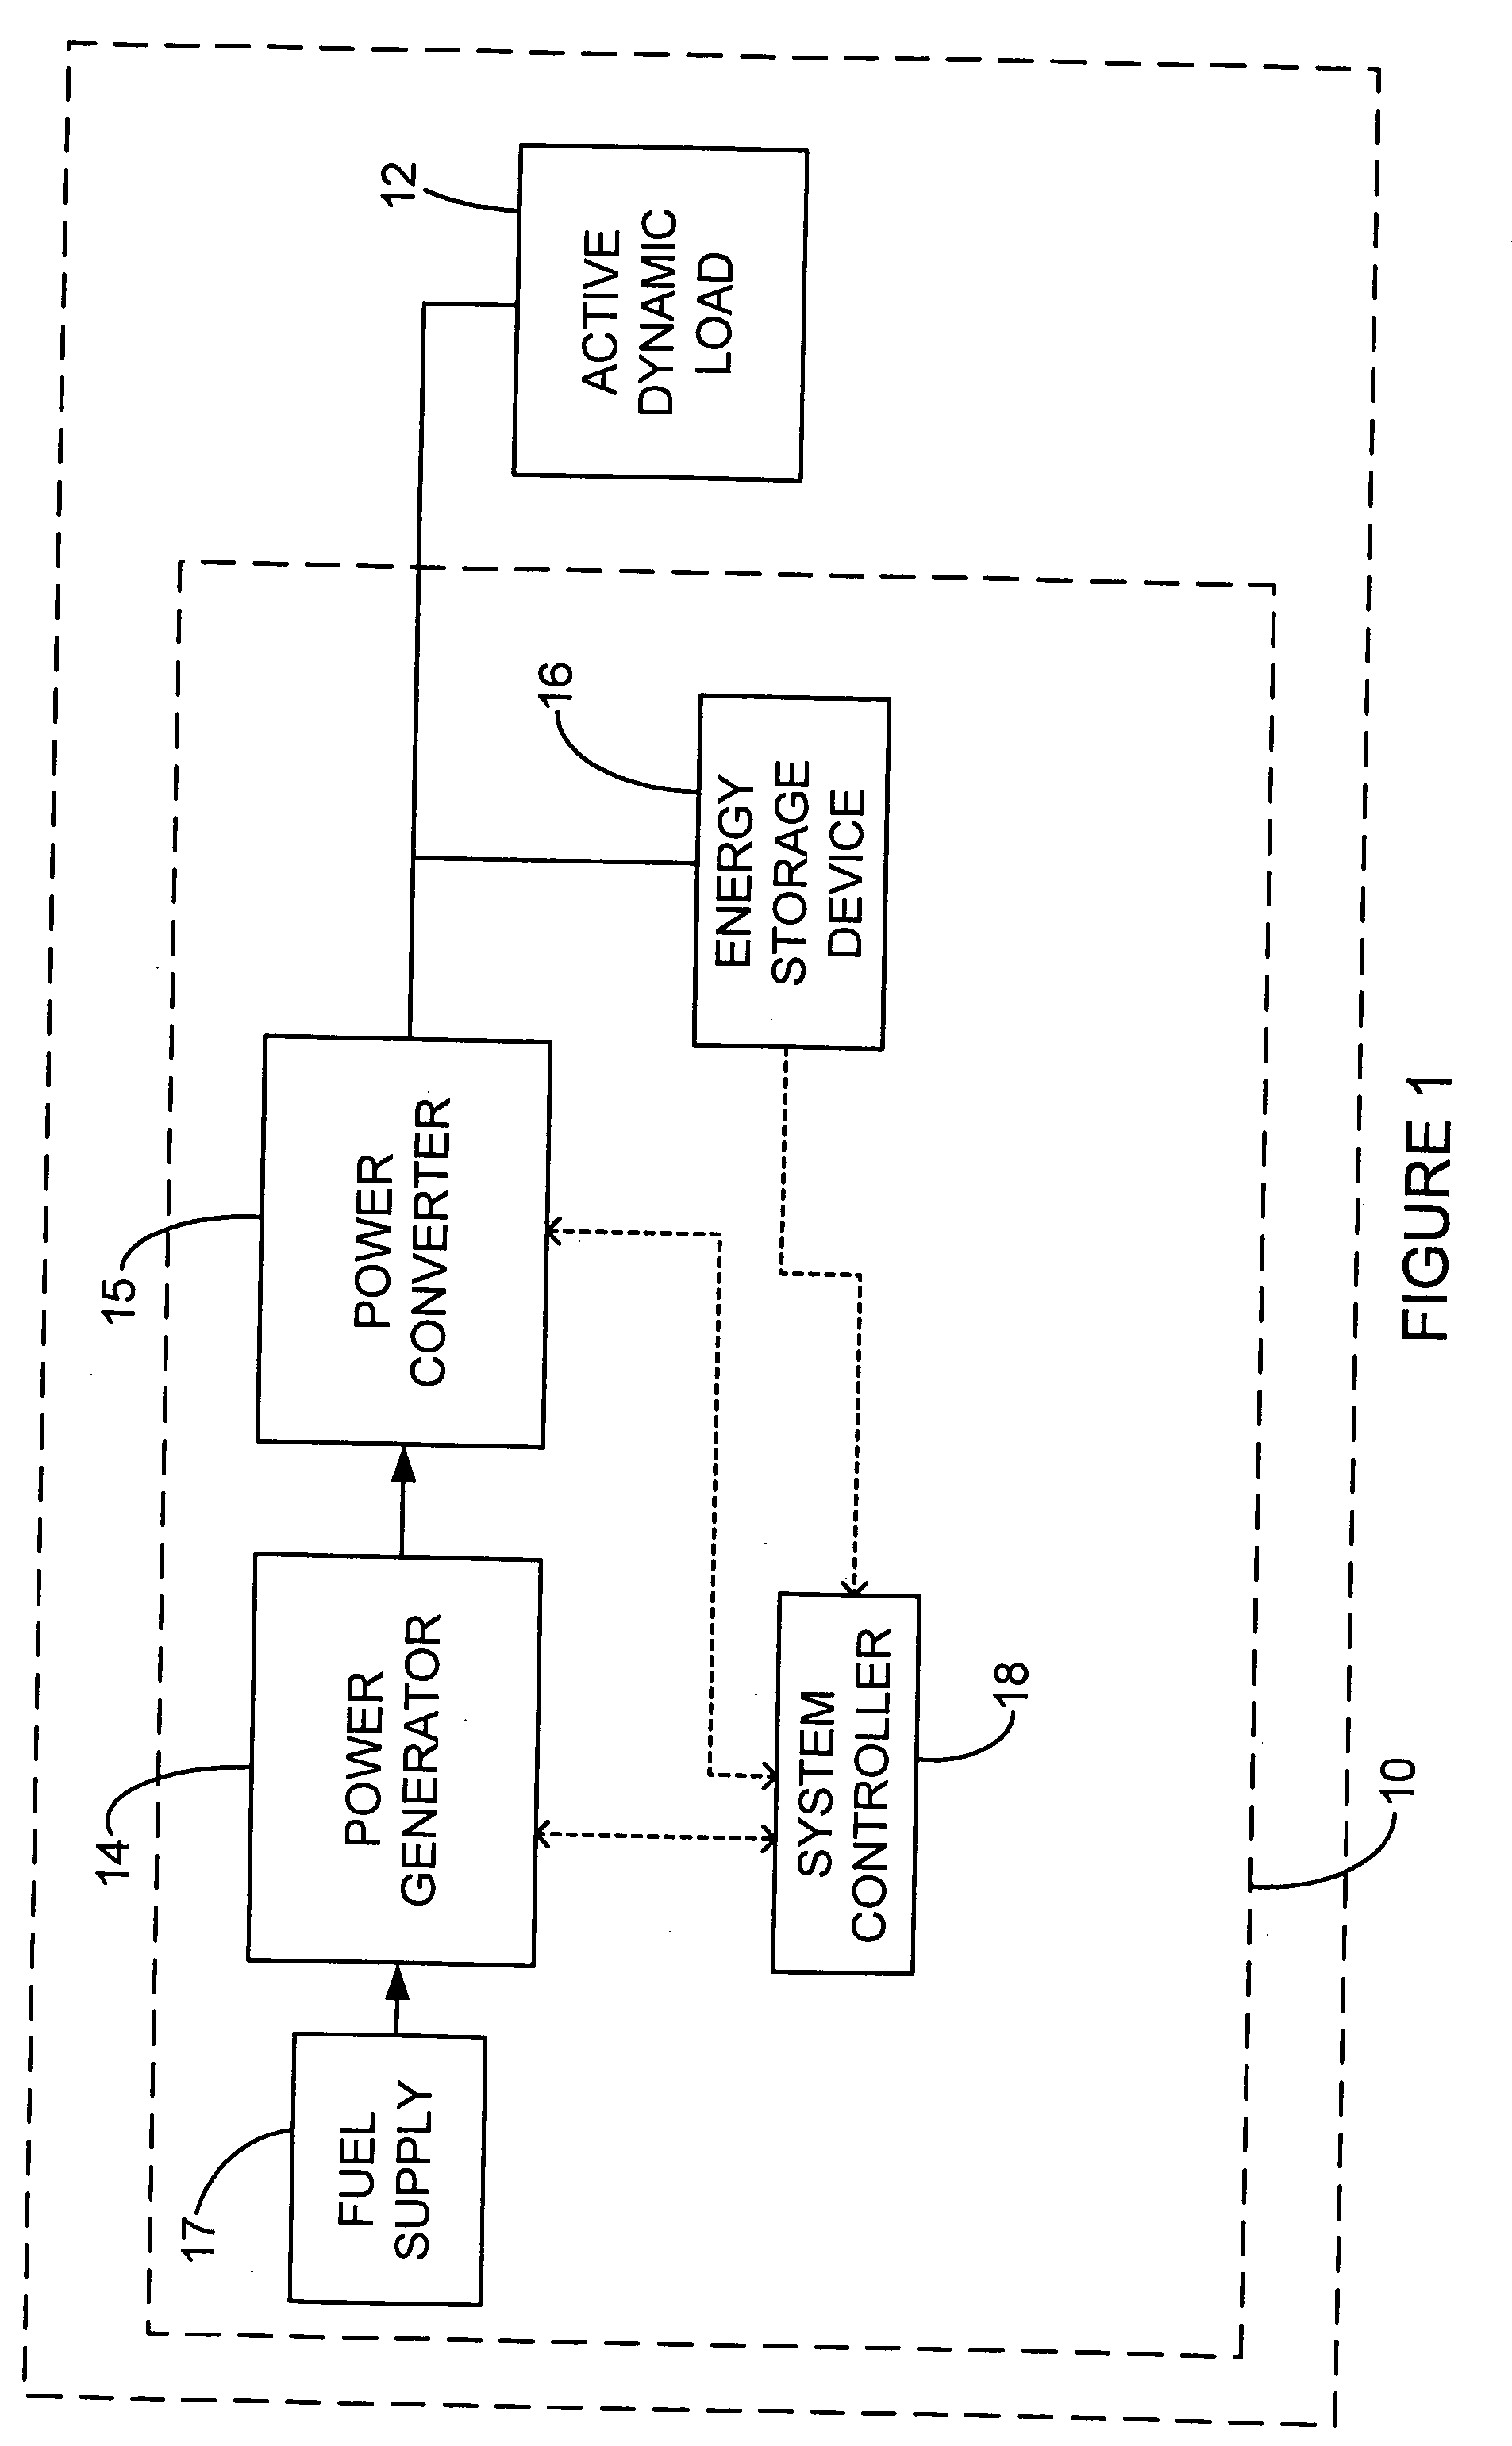 Hybrid power supply system having energy storage device protection circuit